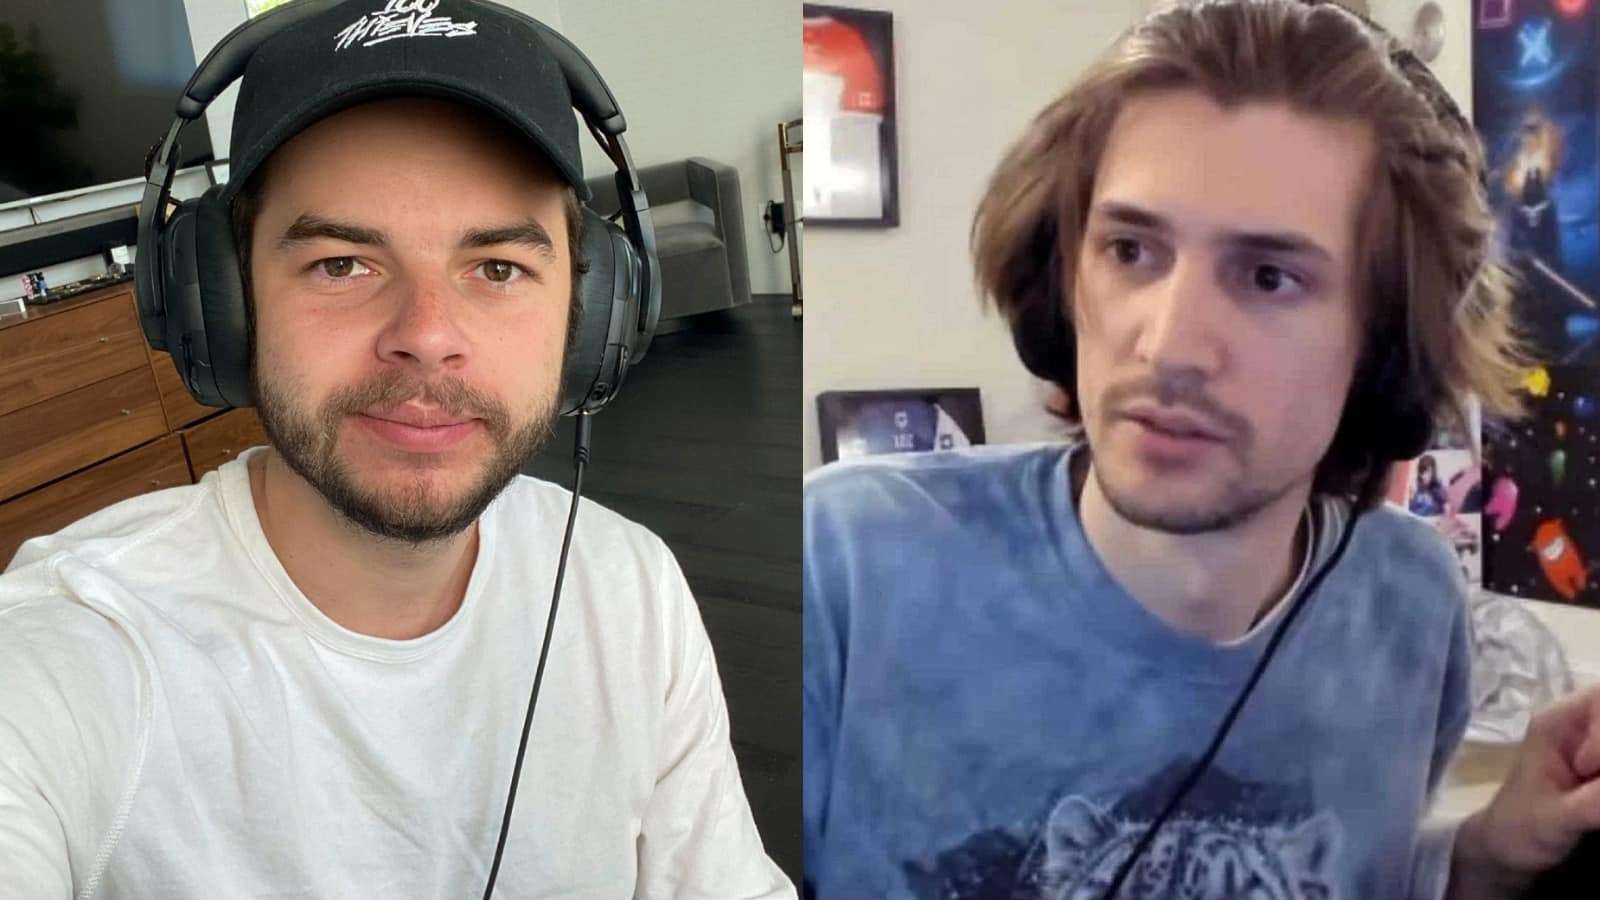 xqc and nadeshot side by side